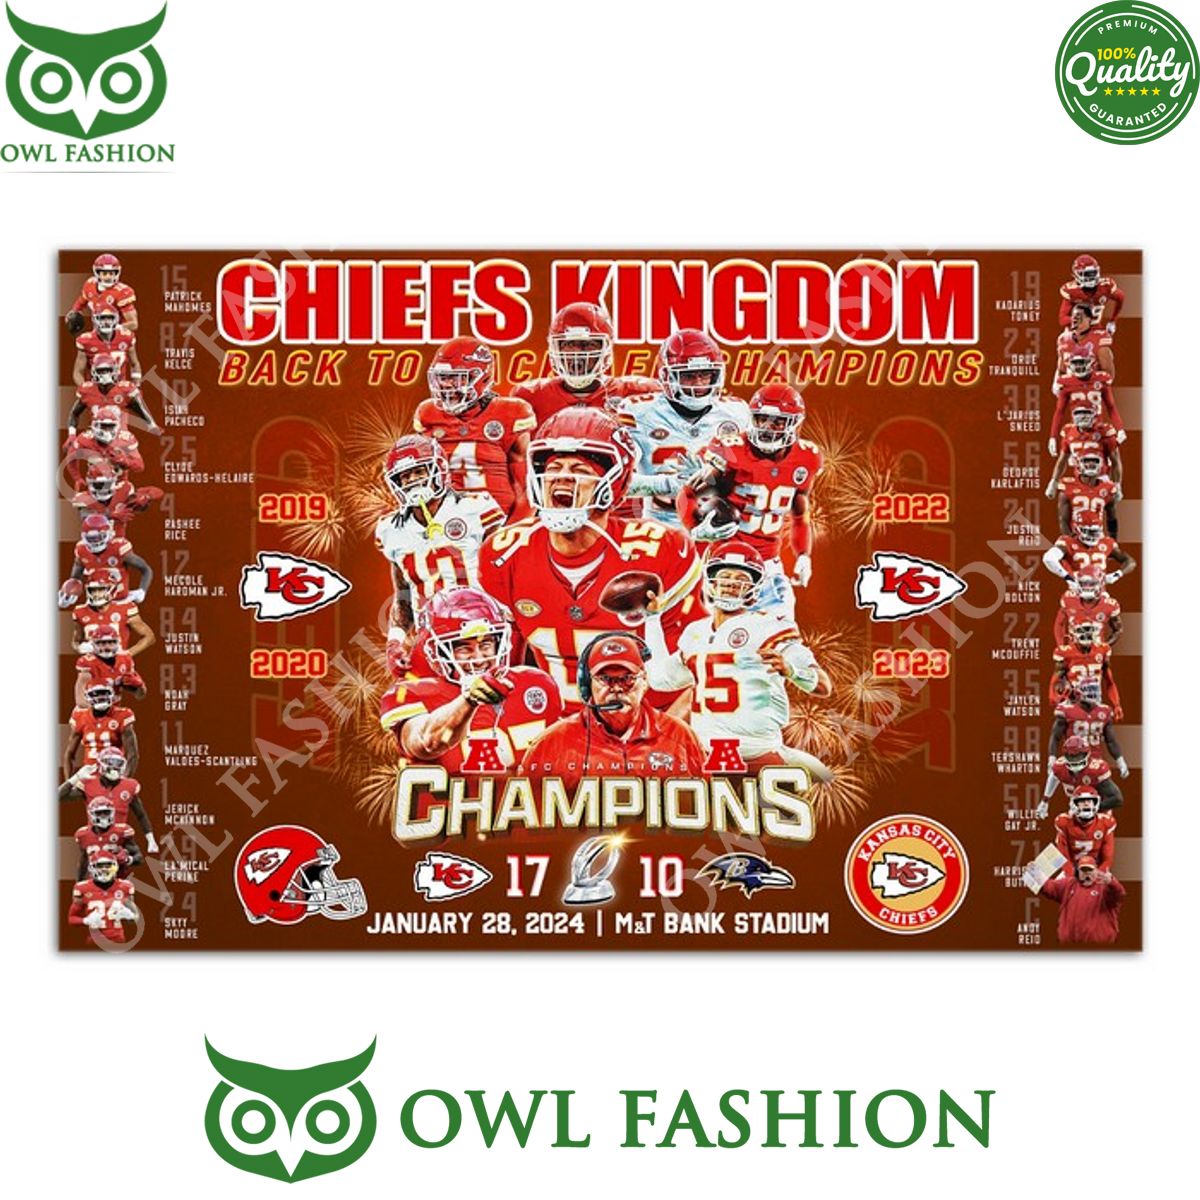 Kansas City Chiefs Kingdom back to Champions 4th time Victory Poster